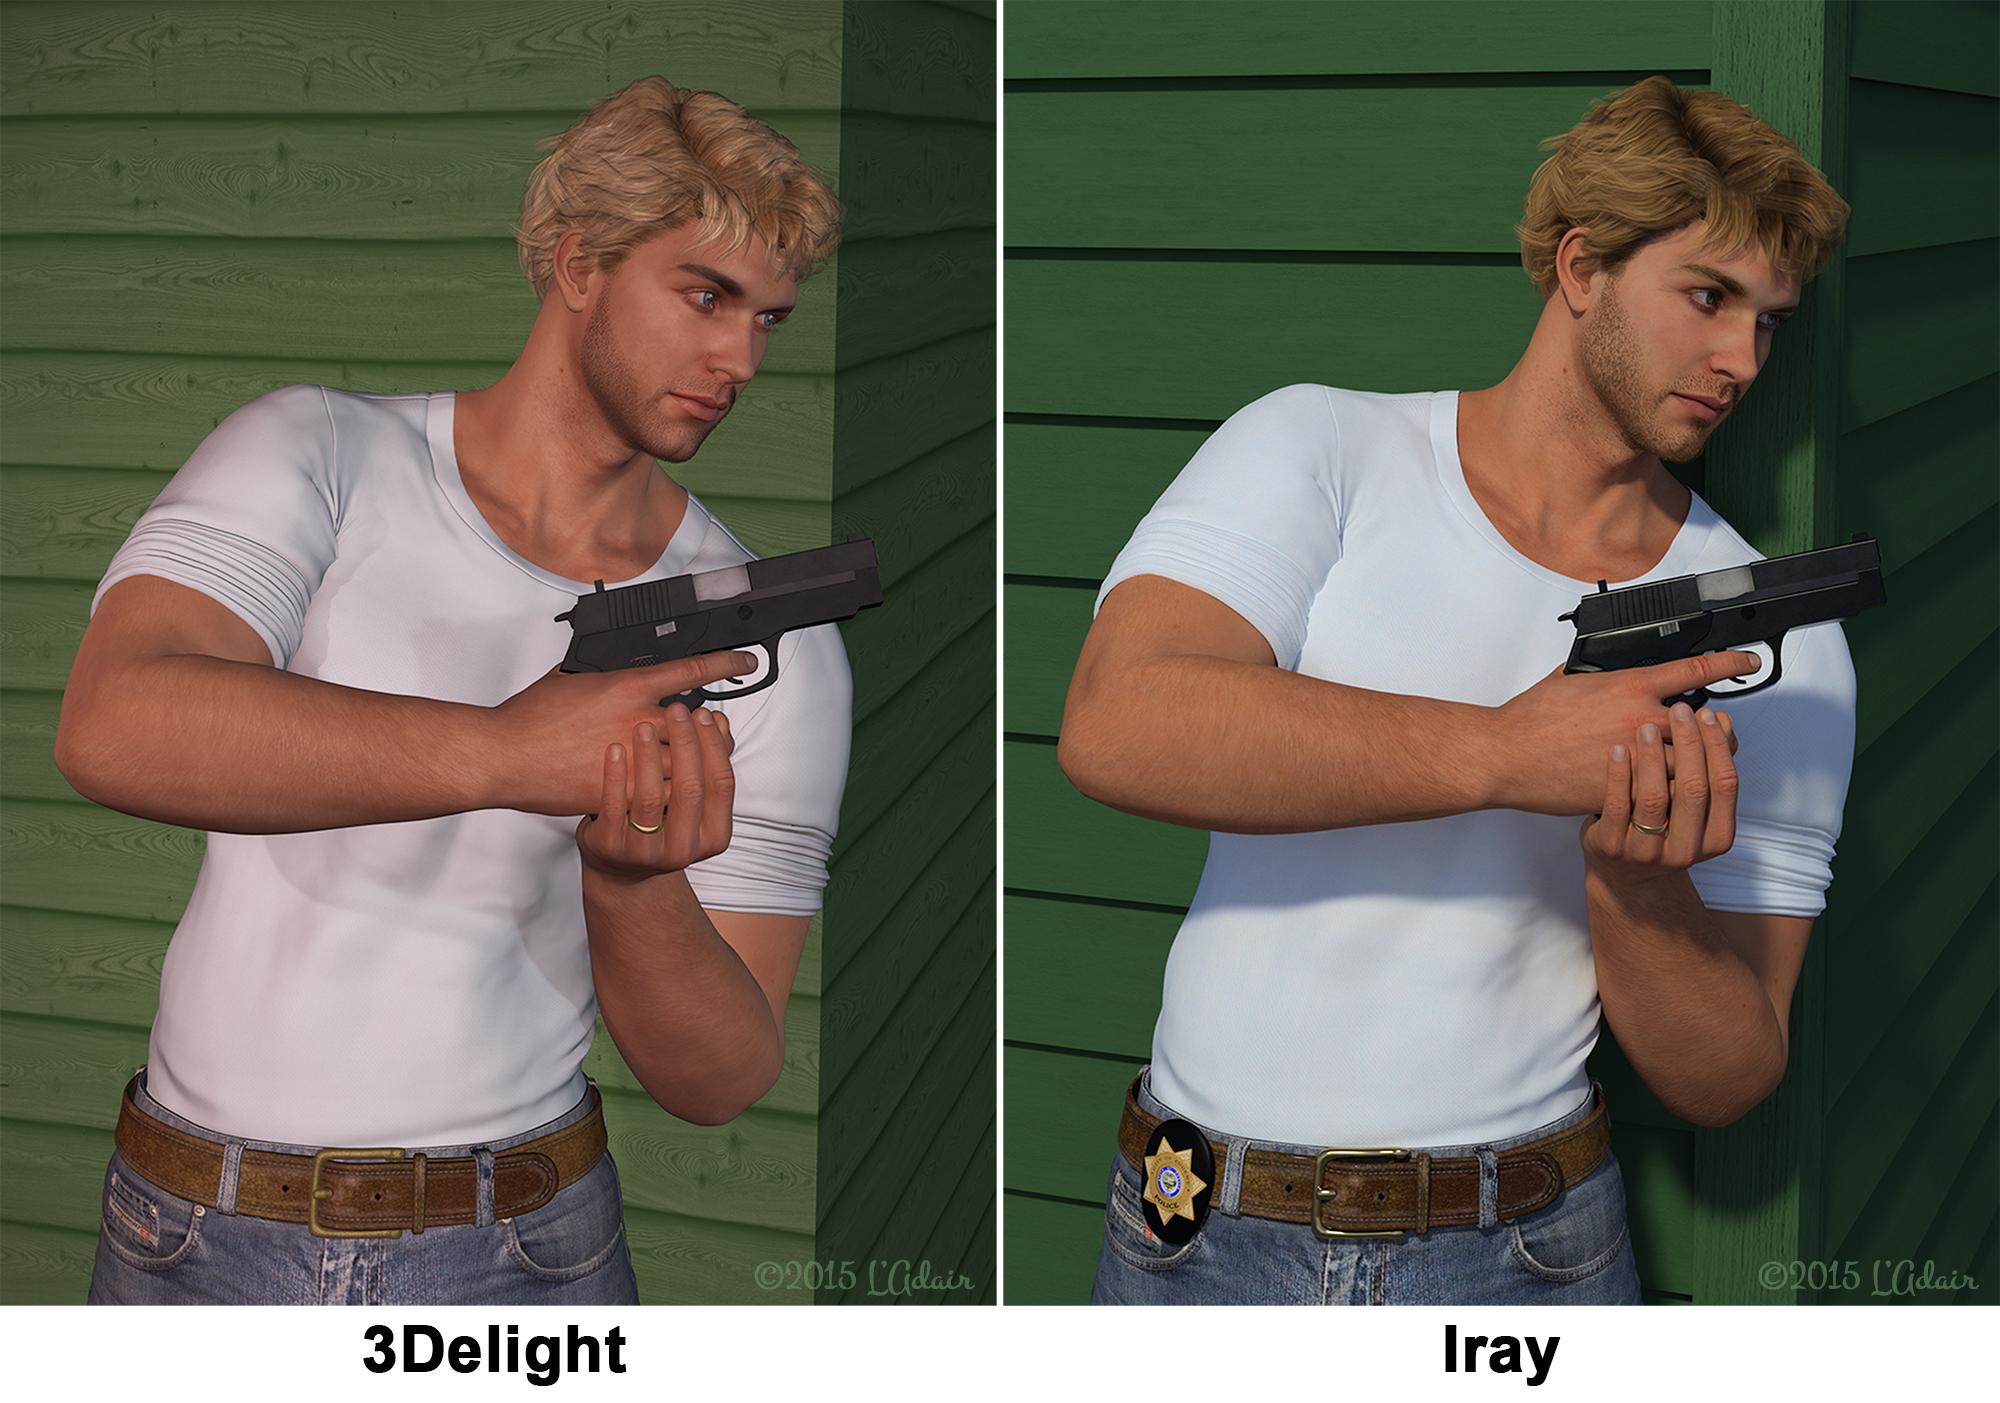 Side-by-side comparison of 3Delight and Iray render, by L'Adair